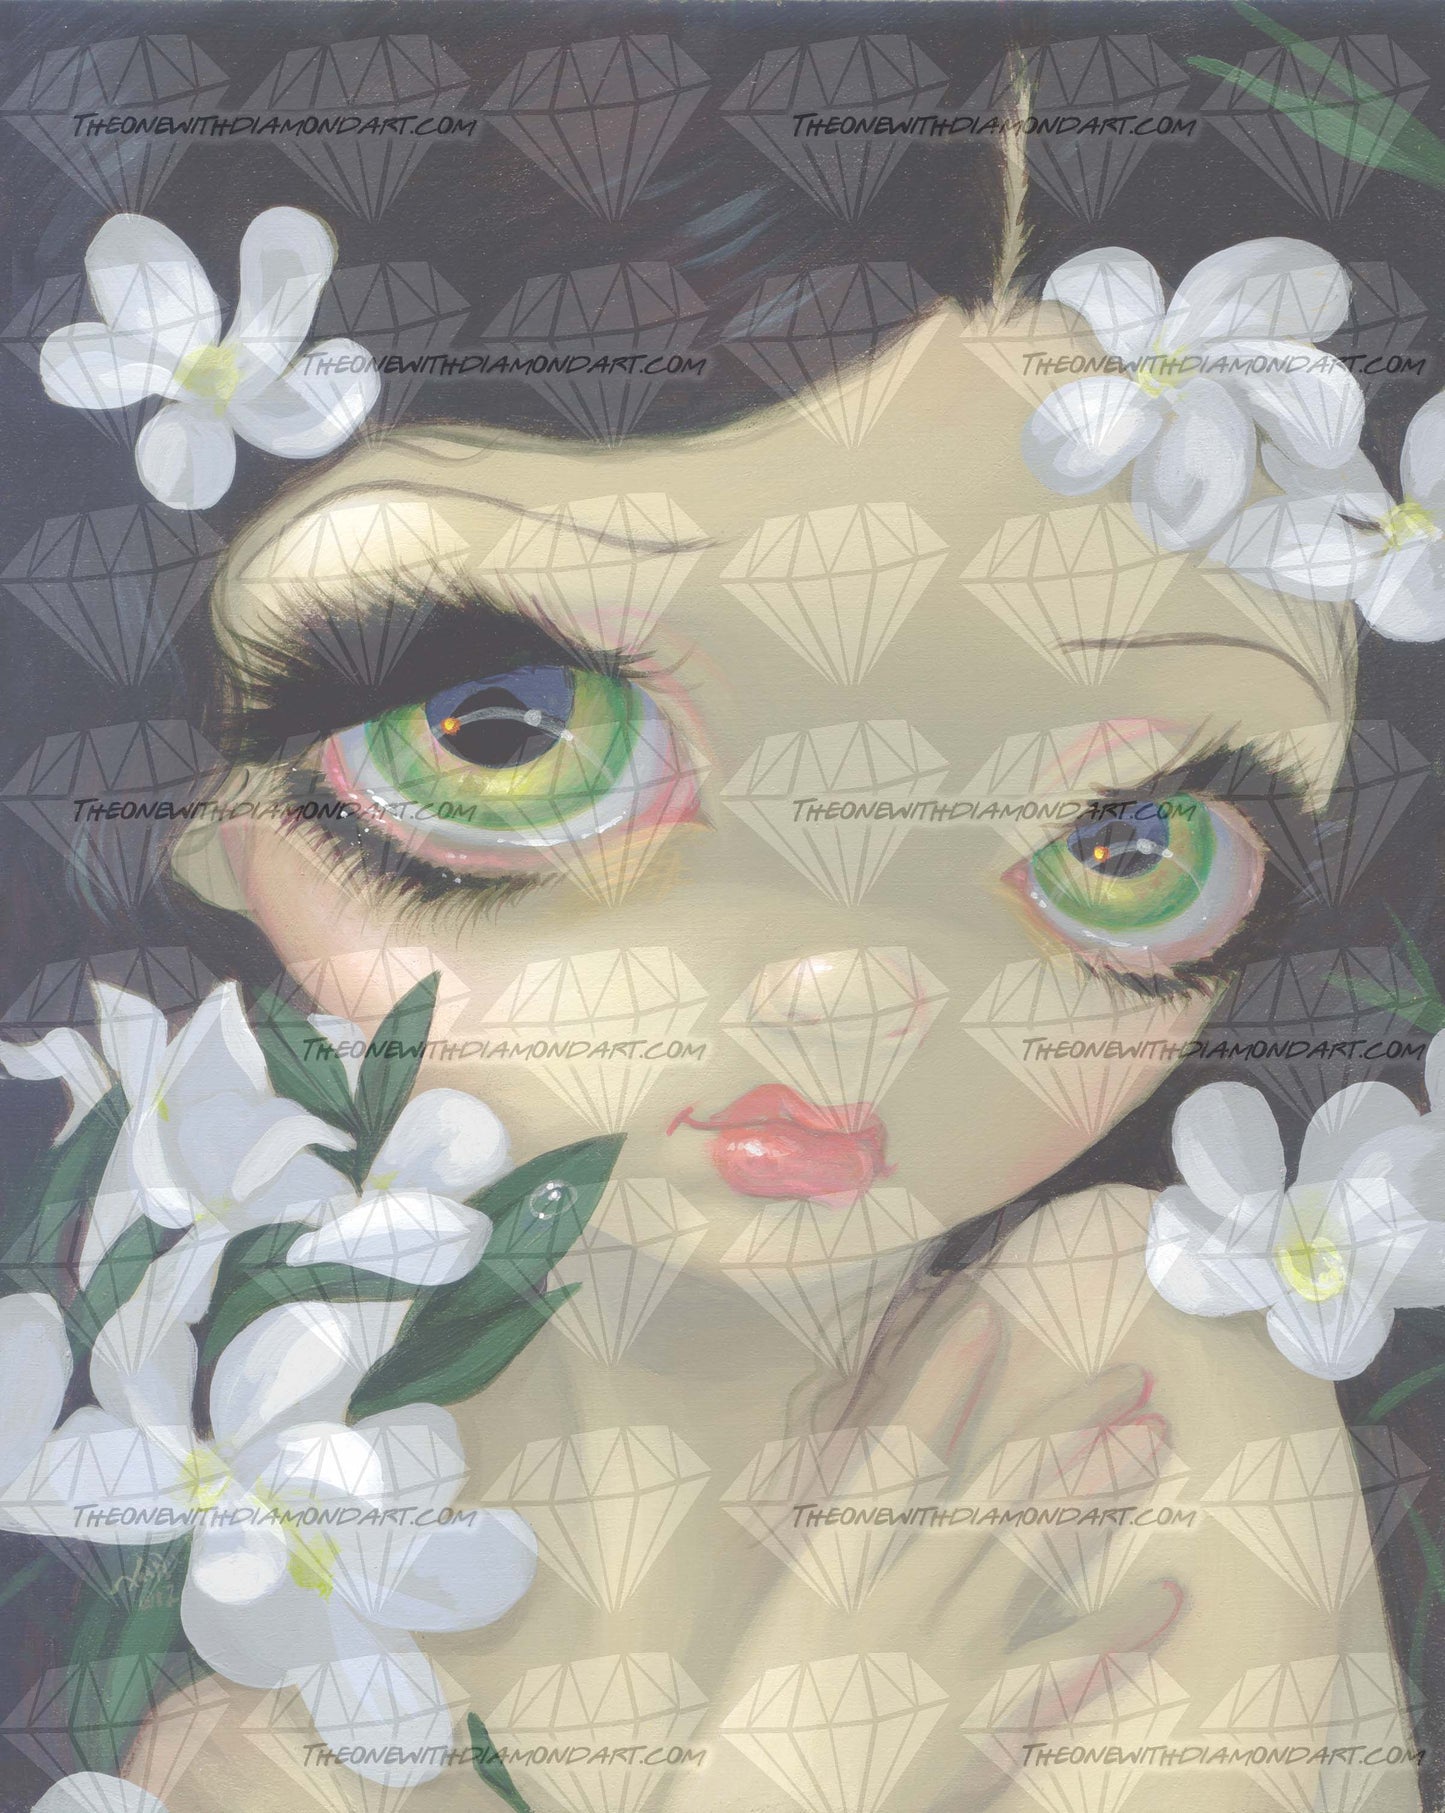 Poisonous Beauties 2 ©Jasmine Becket-Griffith